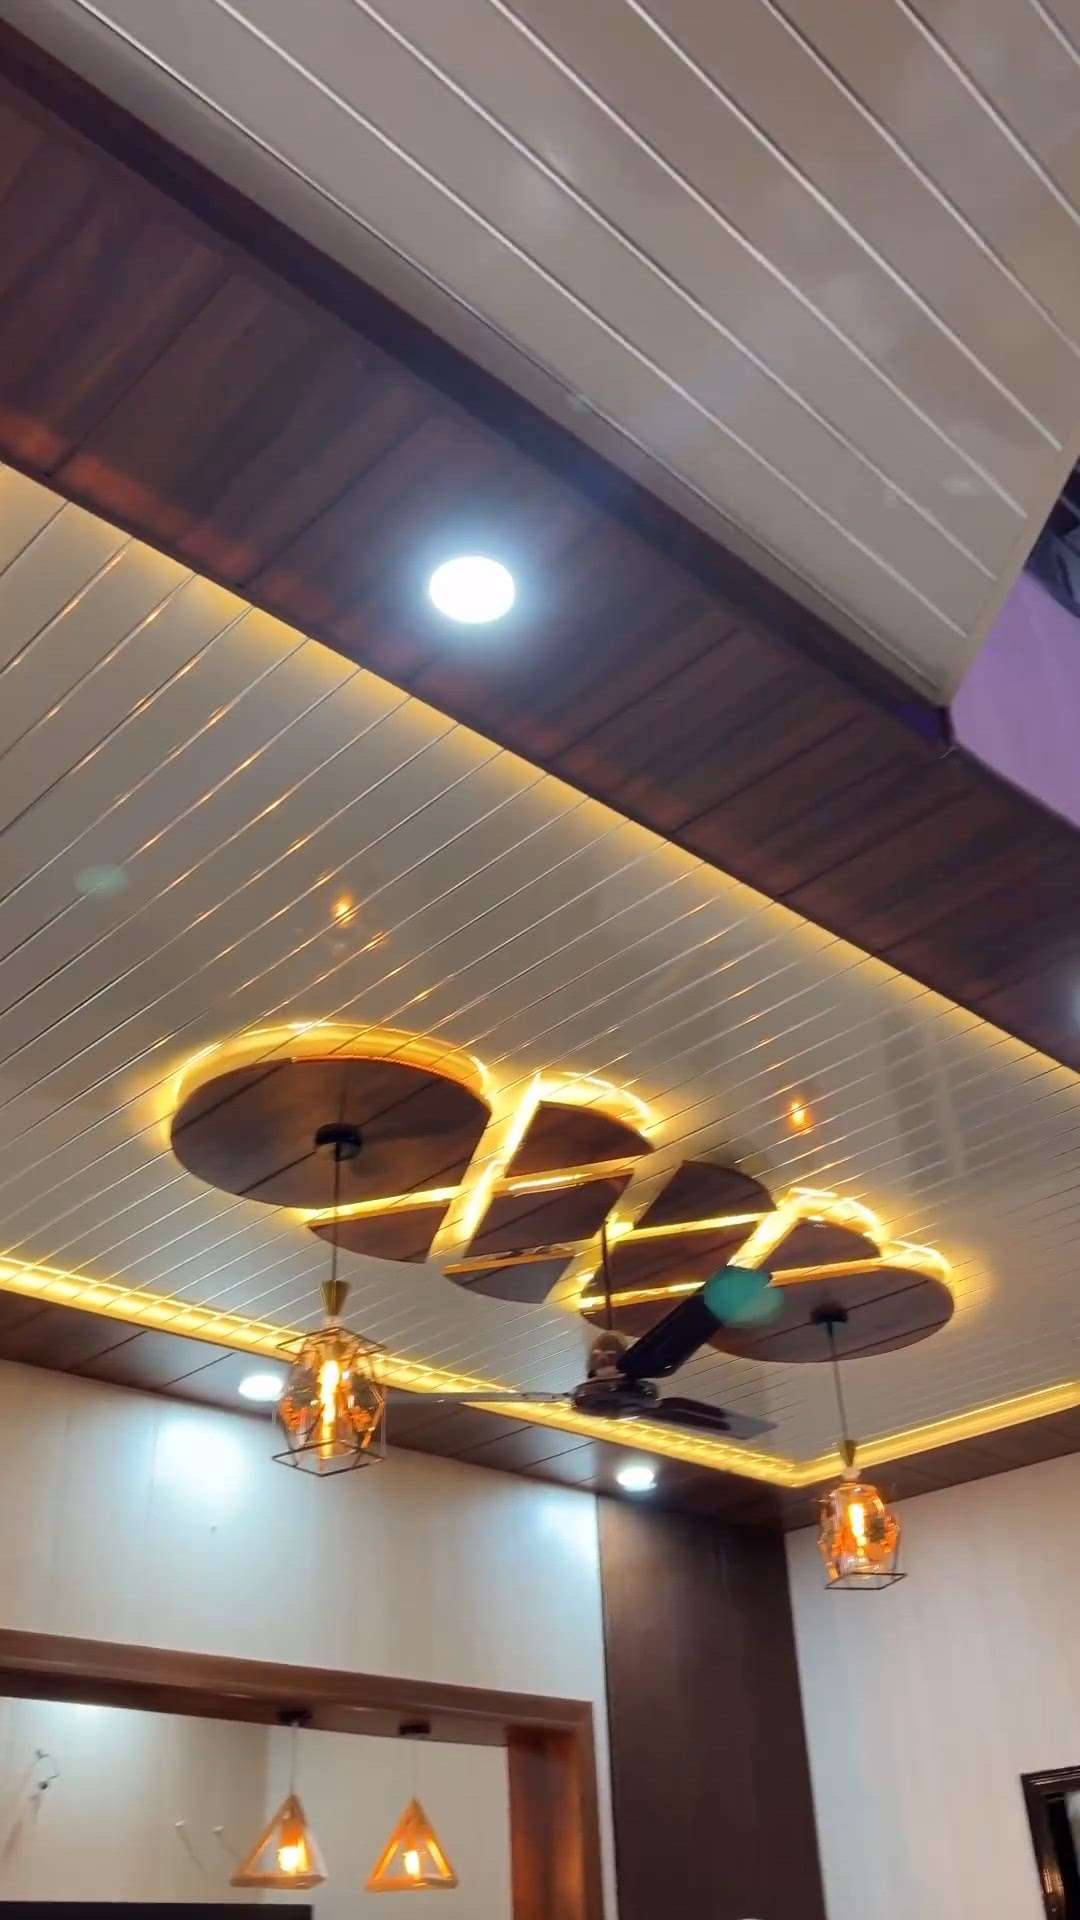 PVC WALL PANEL/CEILING  


 #PVCFalseCeiling  #Pvc  #pvcpanelinstallation  #Pvcpanel  #pvcwallpanel  #pvcdesign  #pvcceilingdesign  #pvcwallpanel